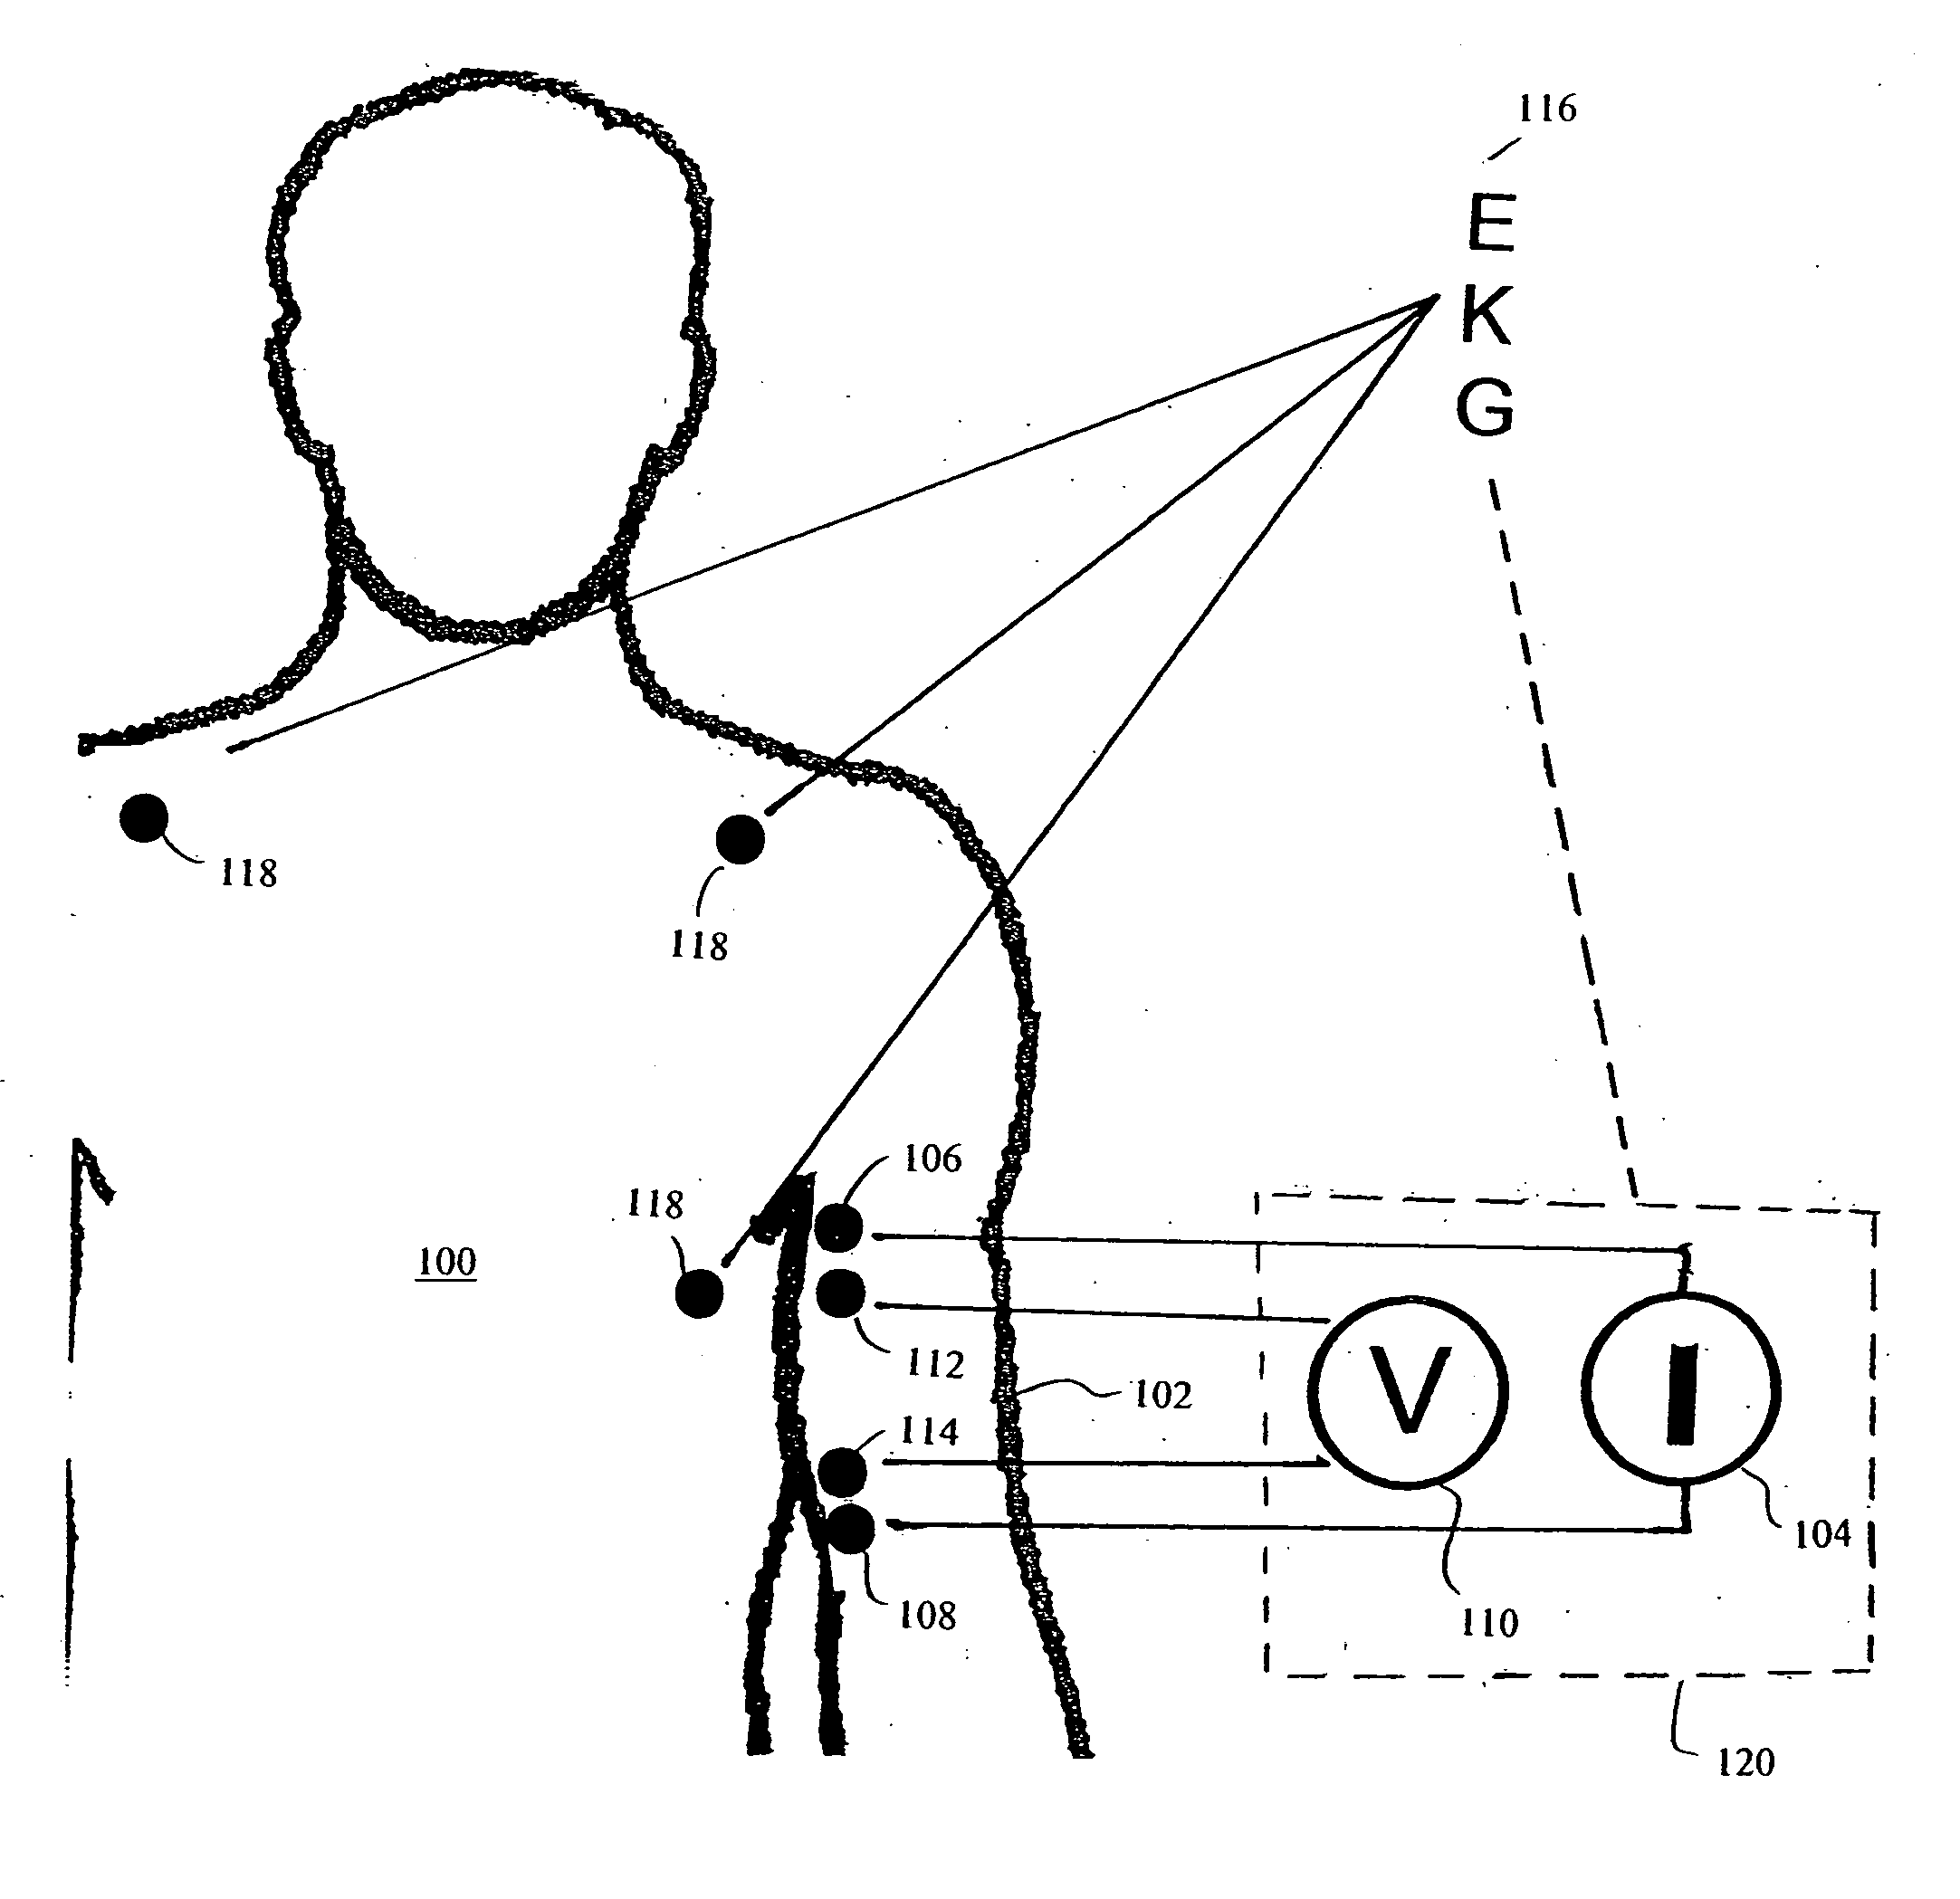 Apparatus and method for determination of stroke volume using the brachial artery